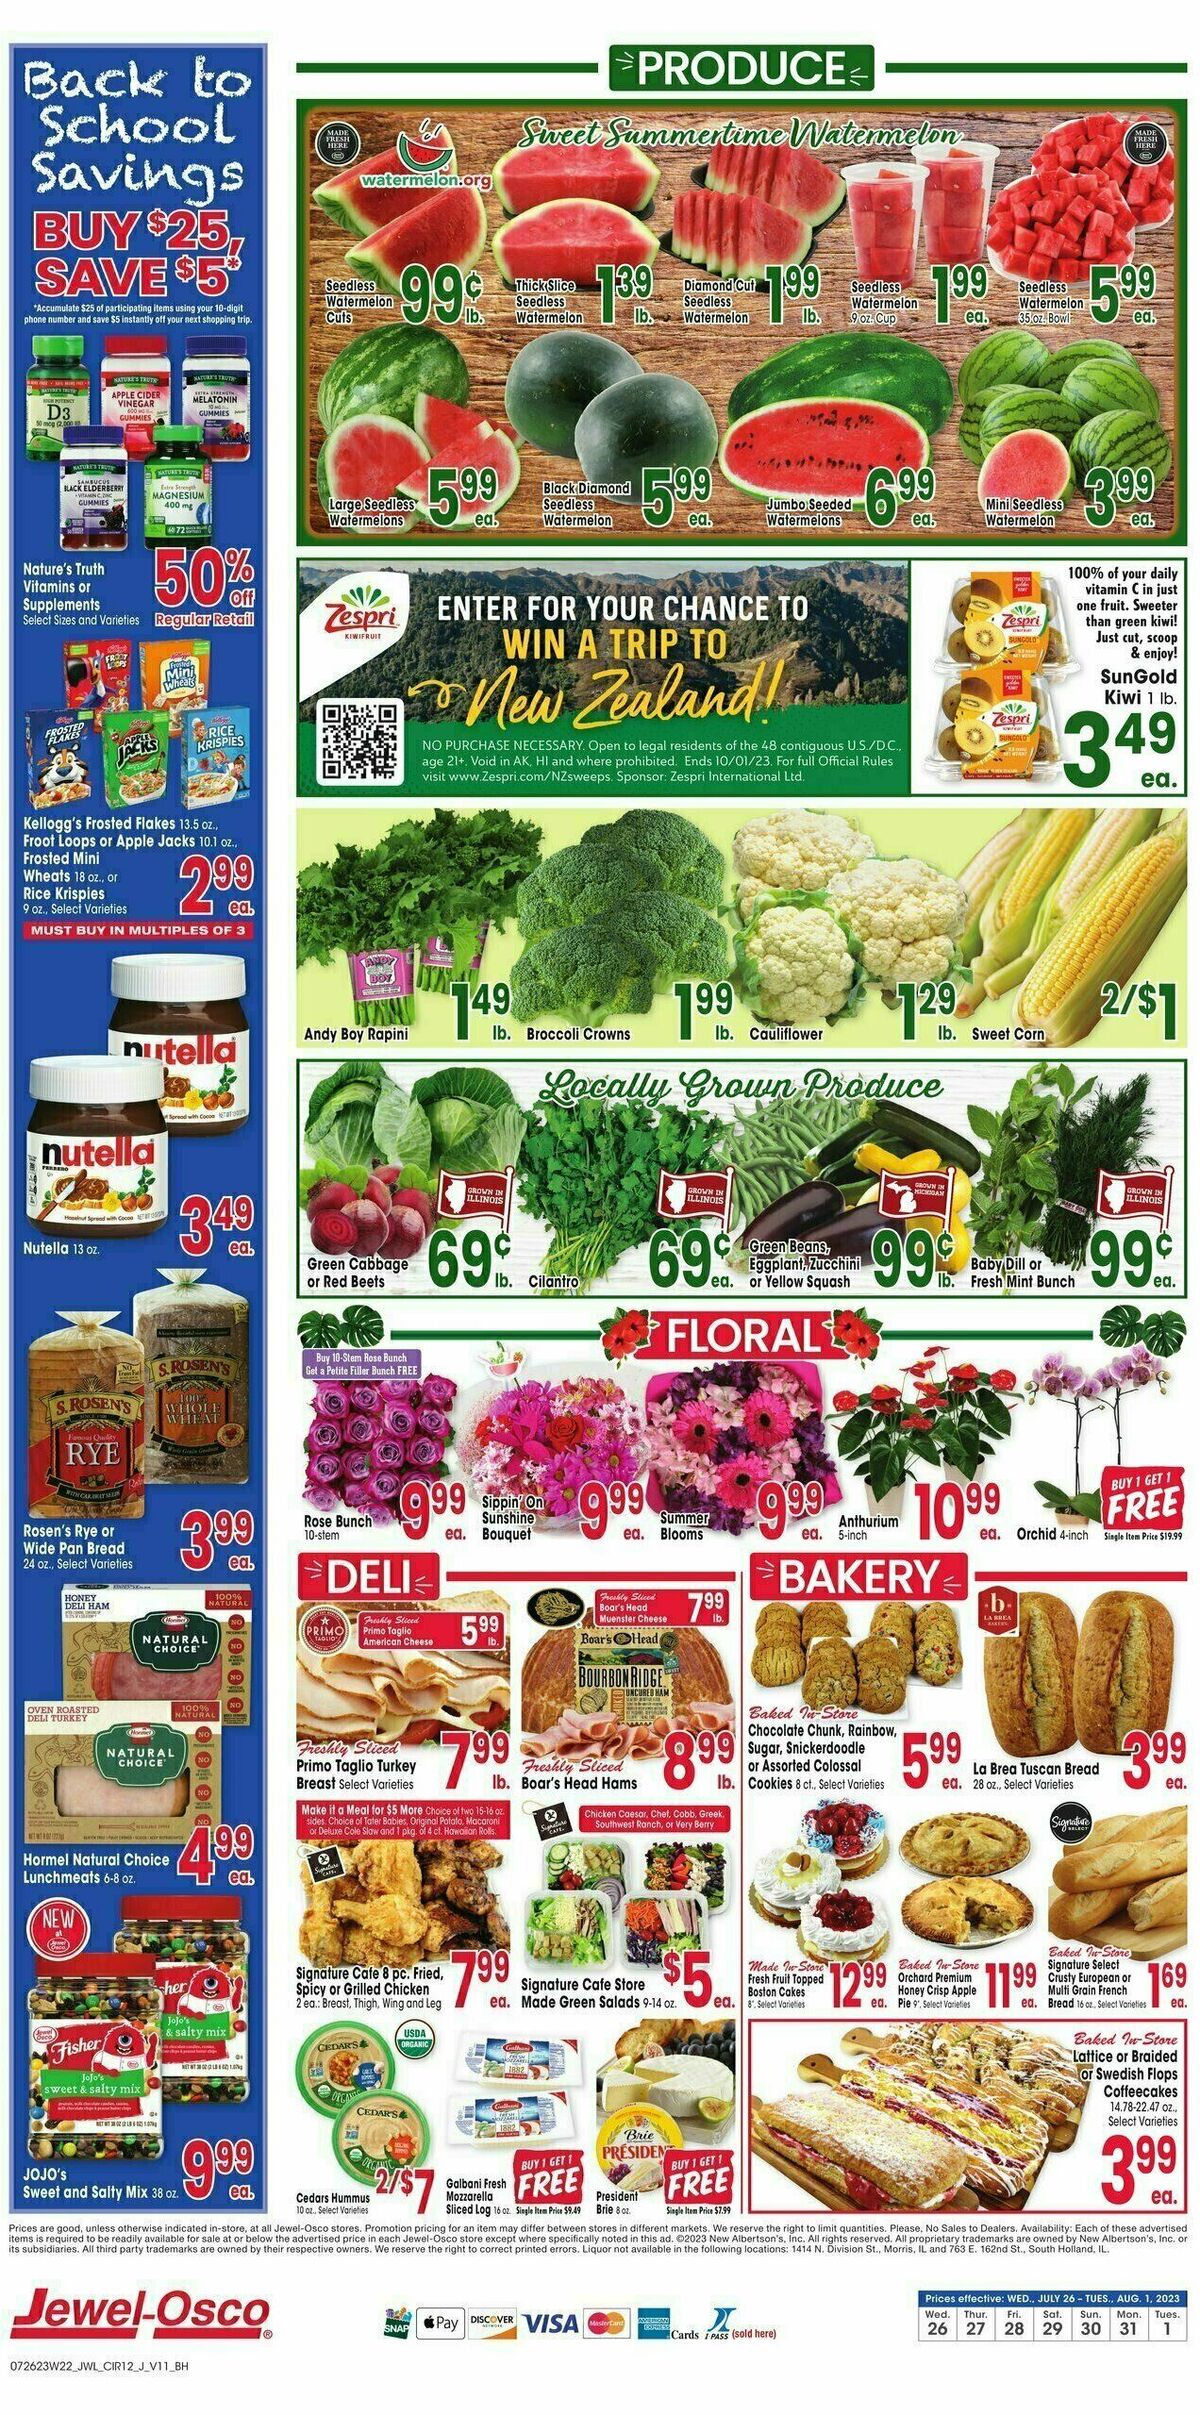 Jewel Osco Weekly Ad from July 26